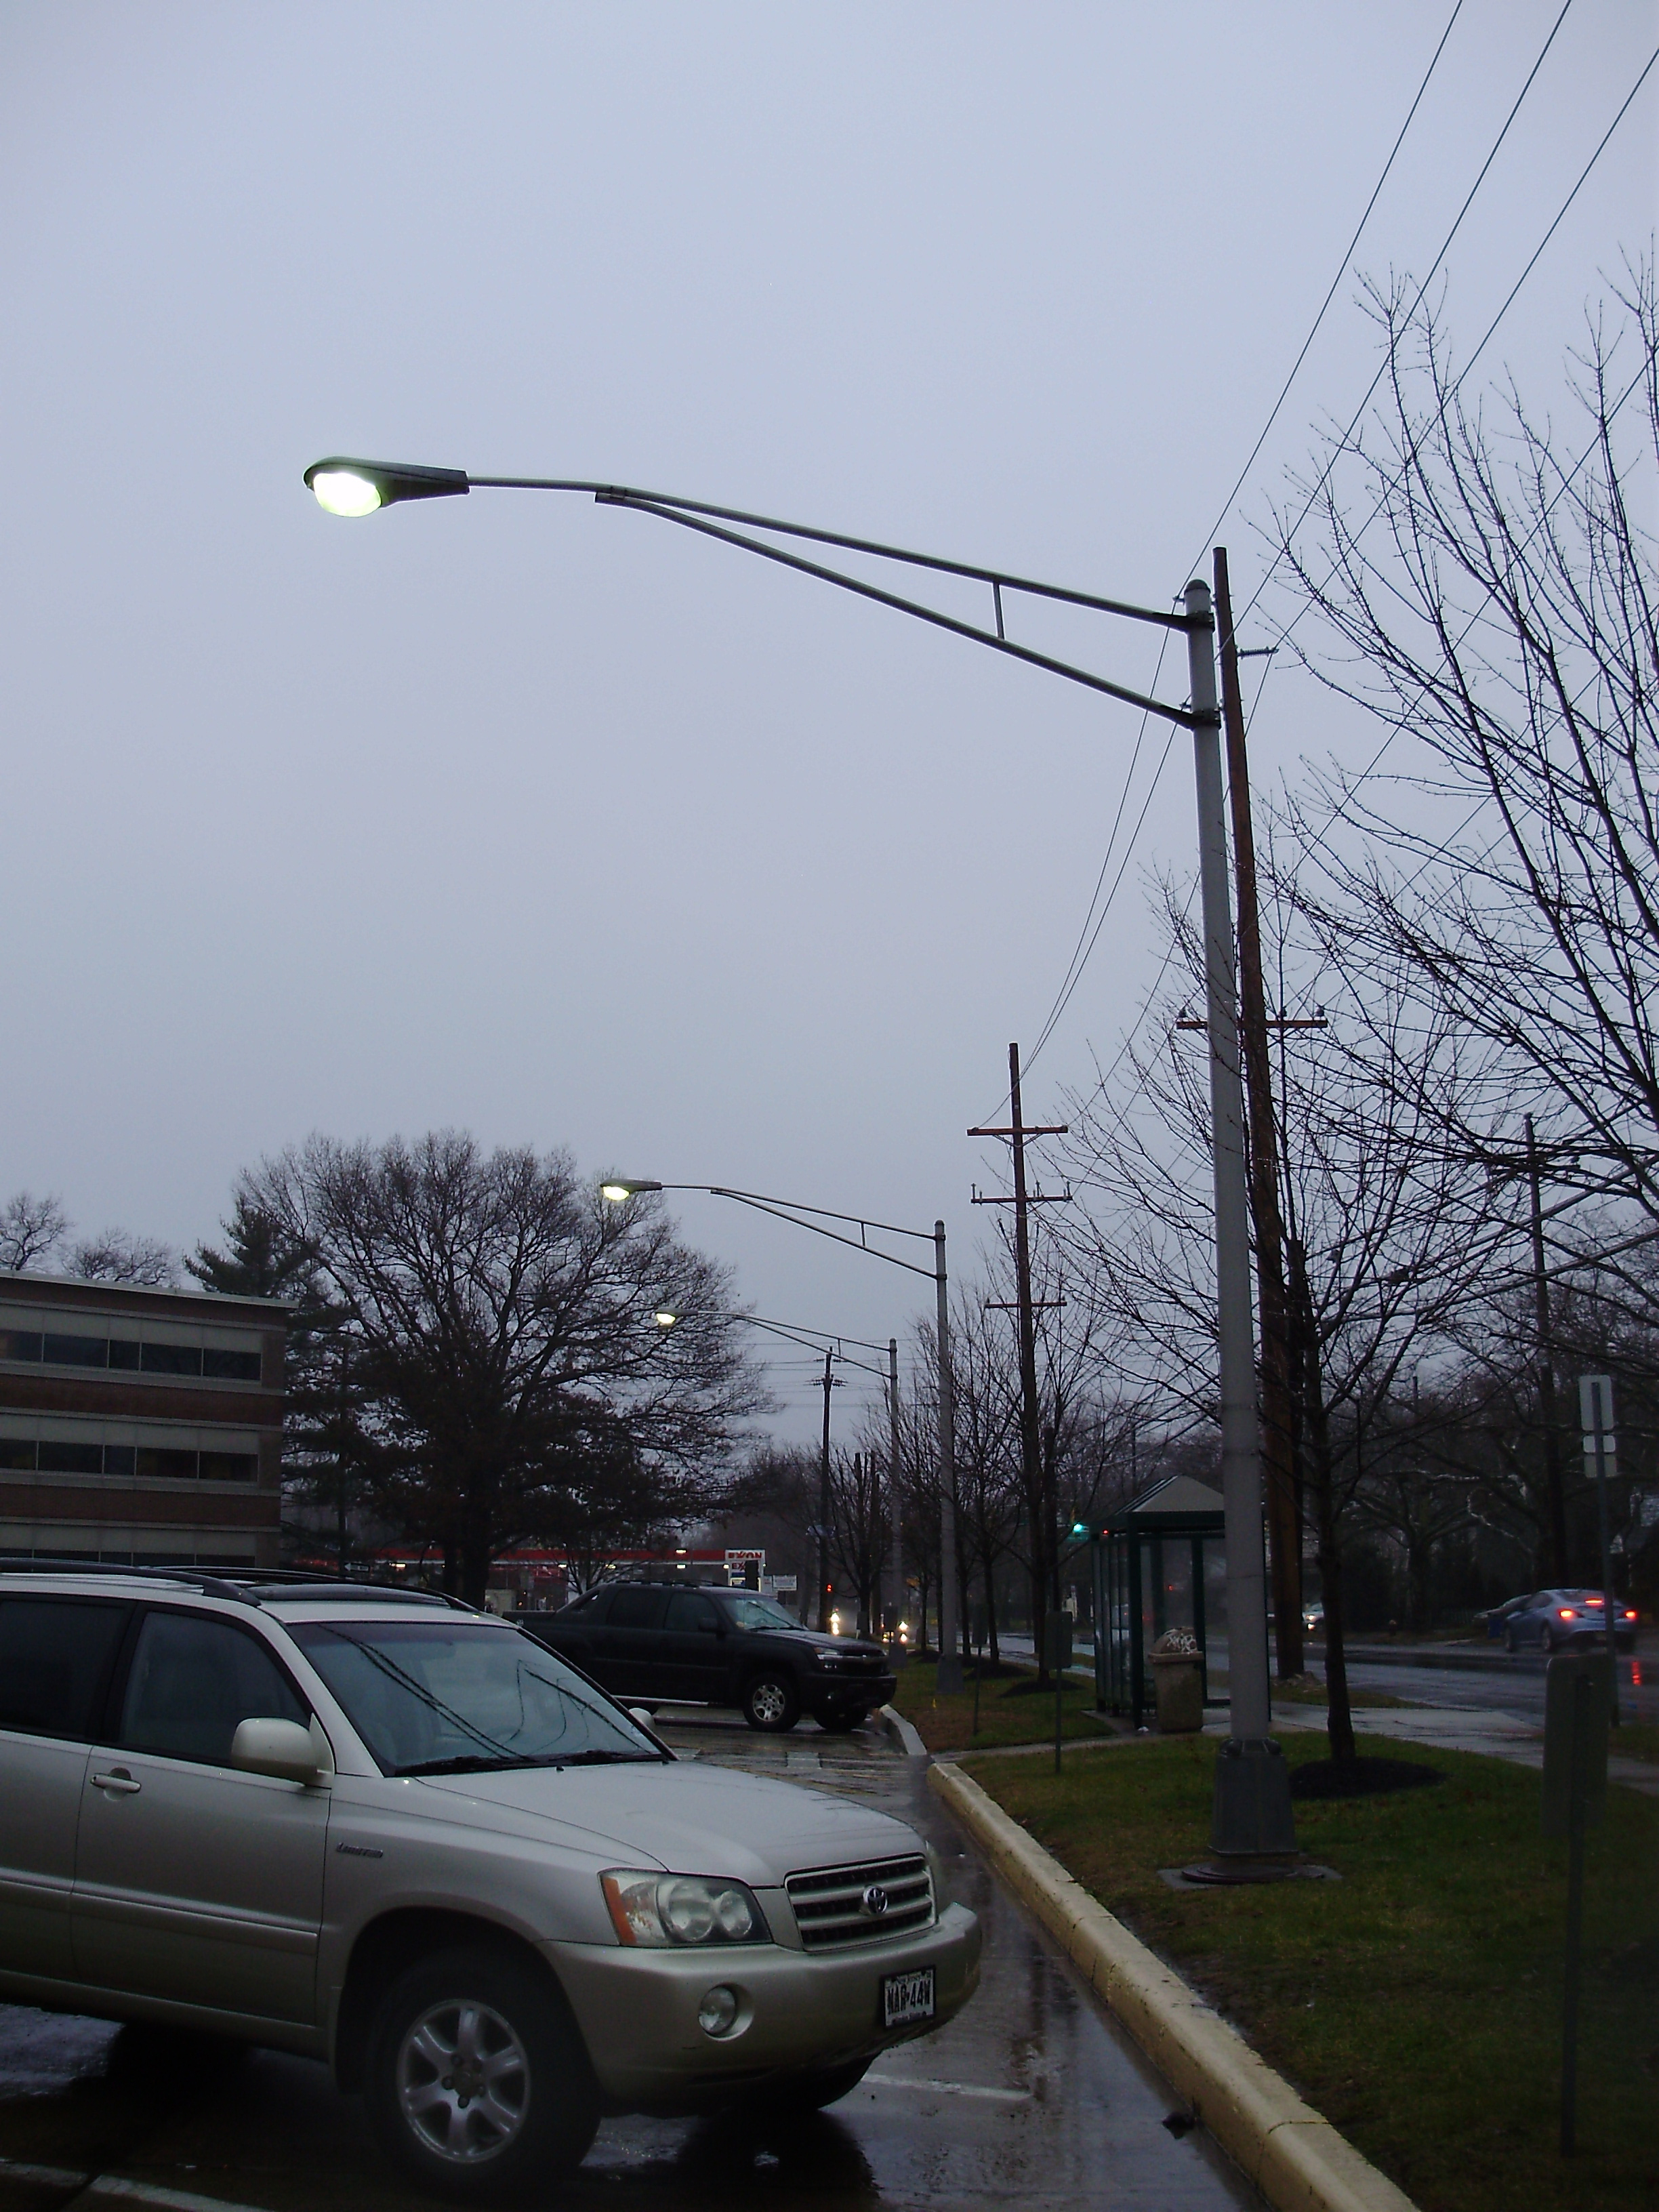 File:2014-12-20 15 47 07 Mercury vapor street lights active during the day at the New Jersey Department of Transportation Headquarters along Parkway Avenue (Mercer County Route 634) in Ewing, New Jersey.JPG - Wikimedia Commons